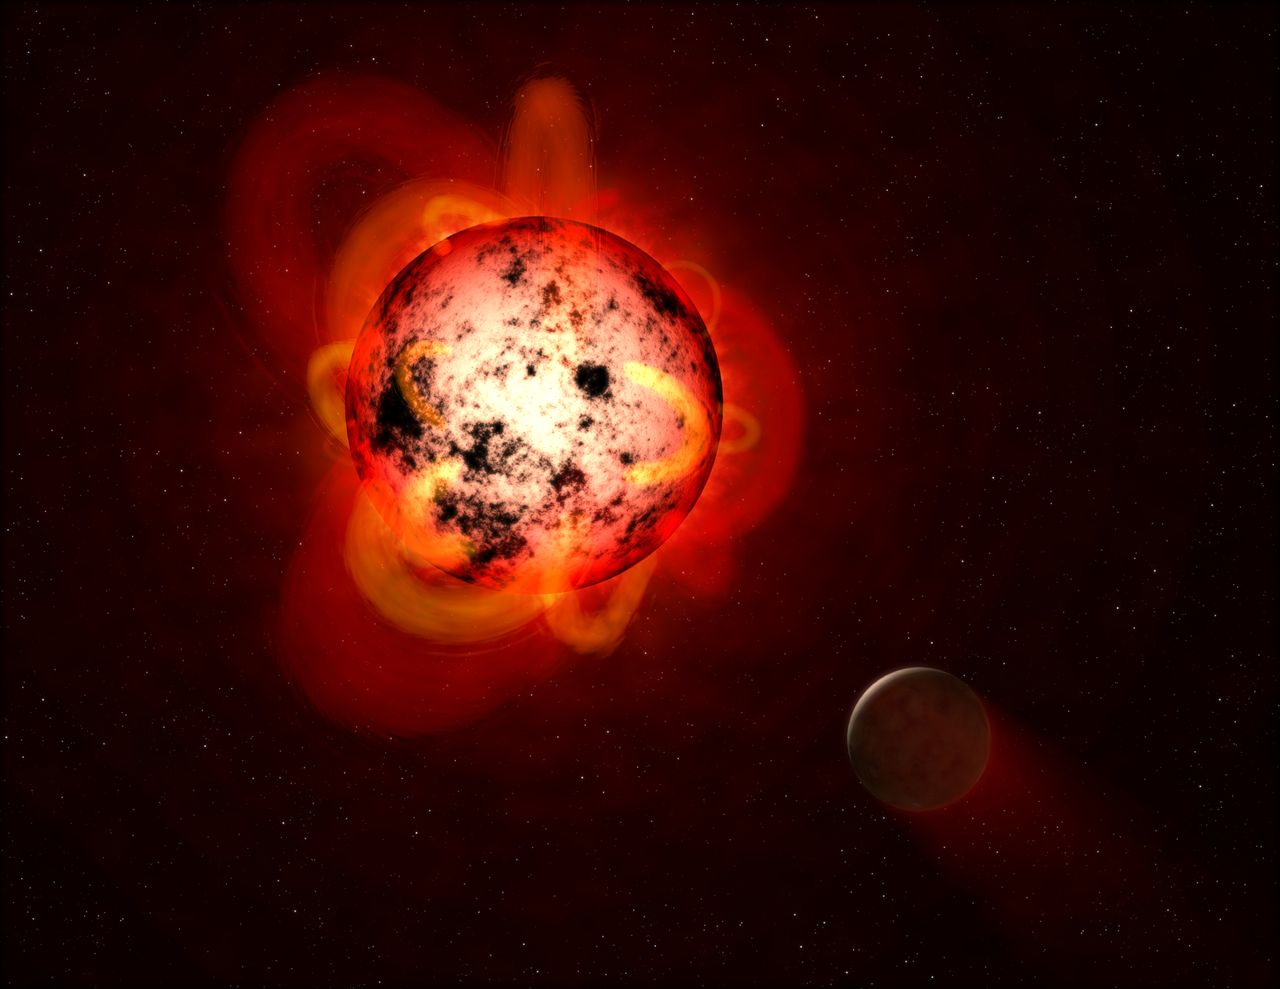 Planet Halla survives as nearby star morphs into a red giant, astonishing astronomers